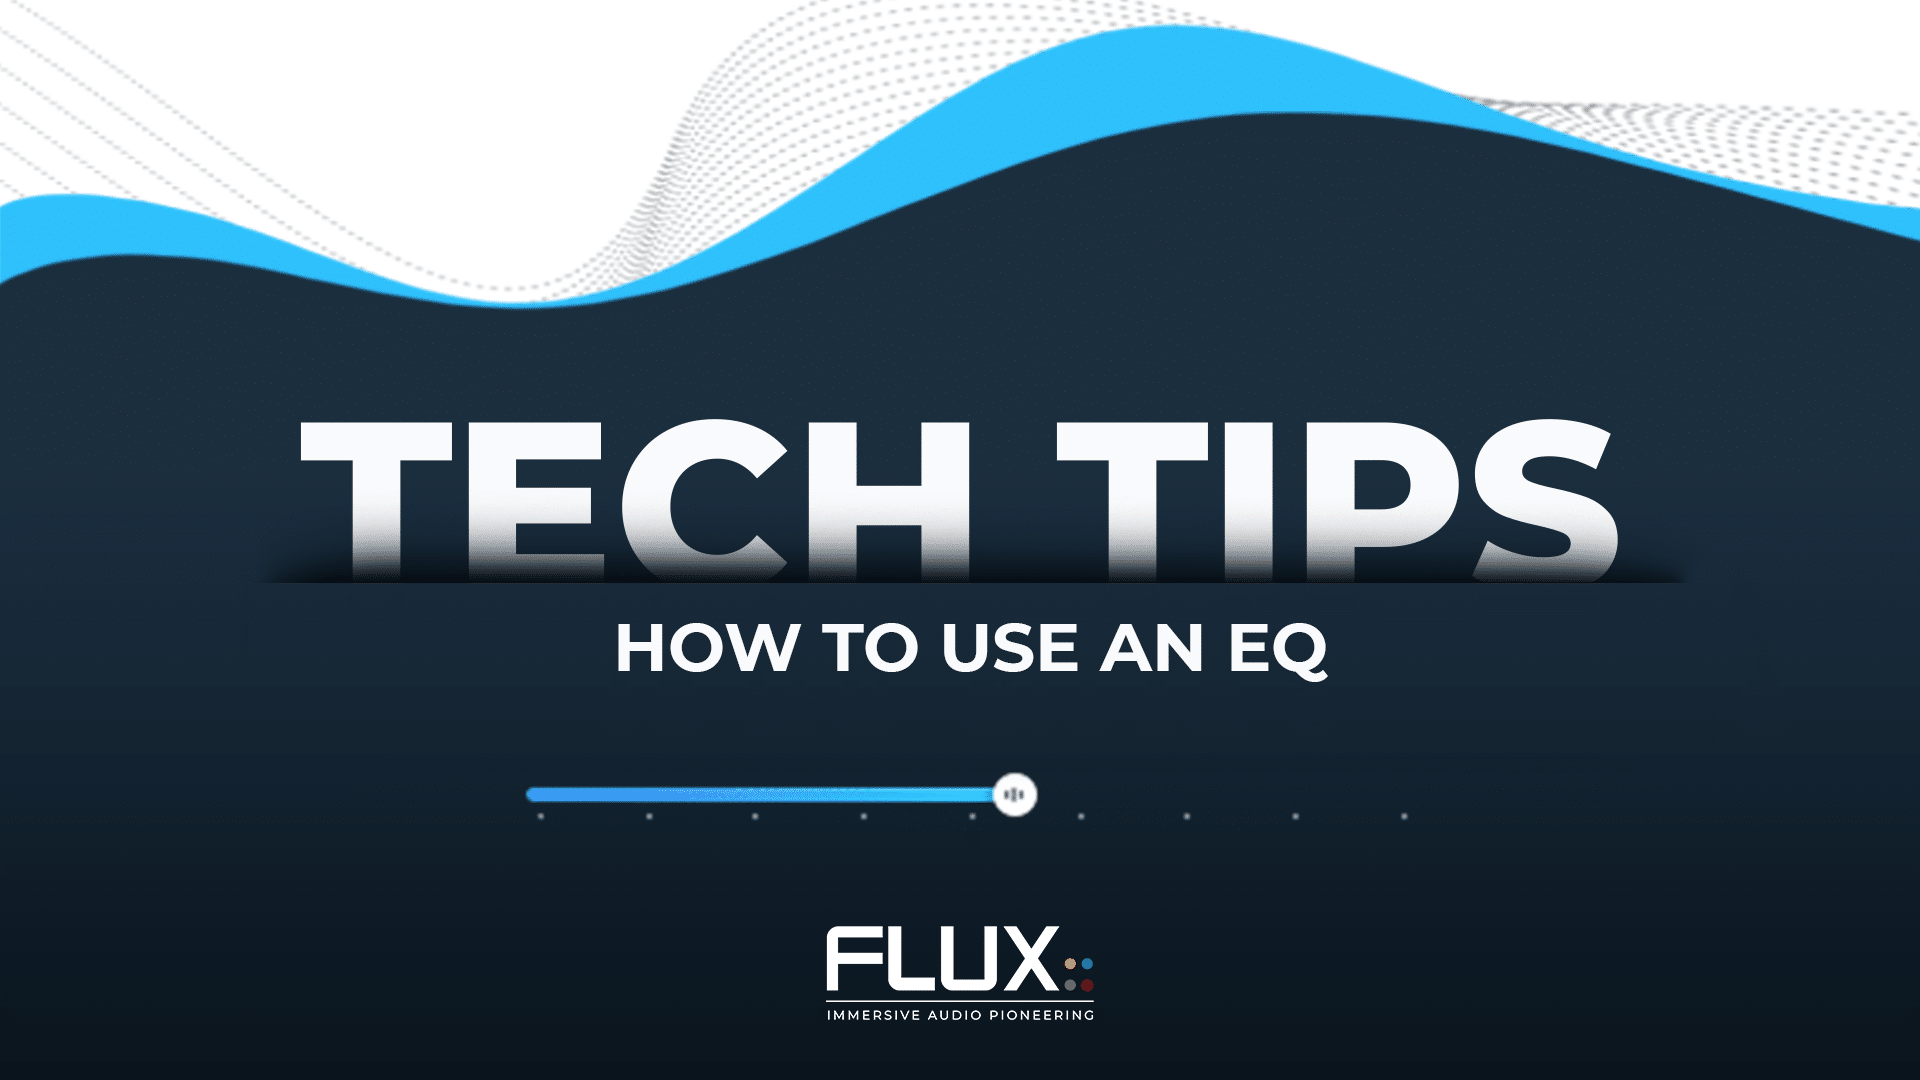 Tech Tips - How to use and EQ